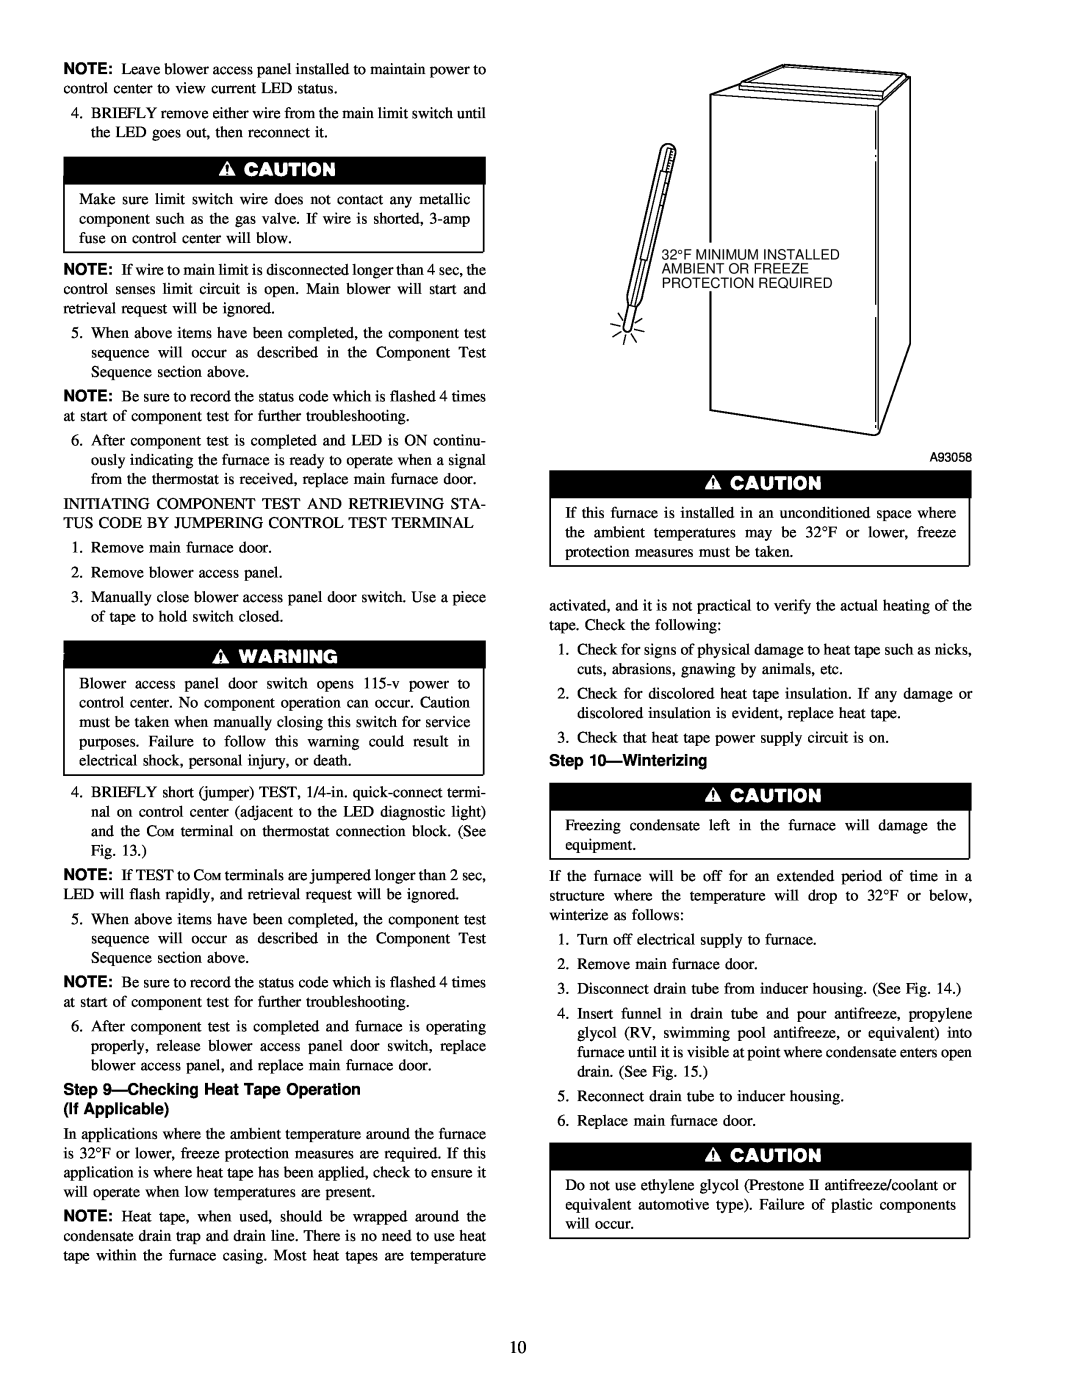 Carrier 58MCA instruction manual ÐChecking Heat Tape Operation If Applicable, ÐWinterizing 